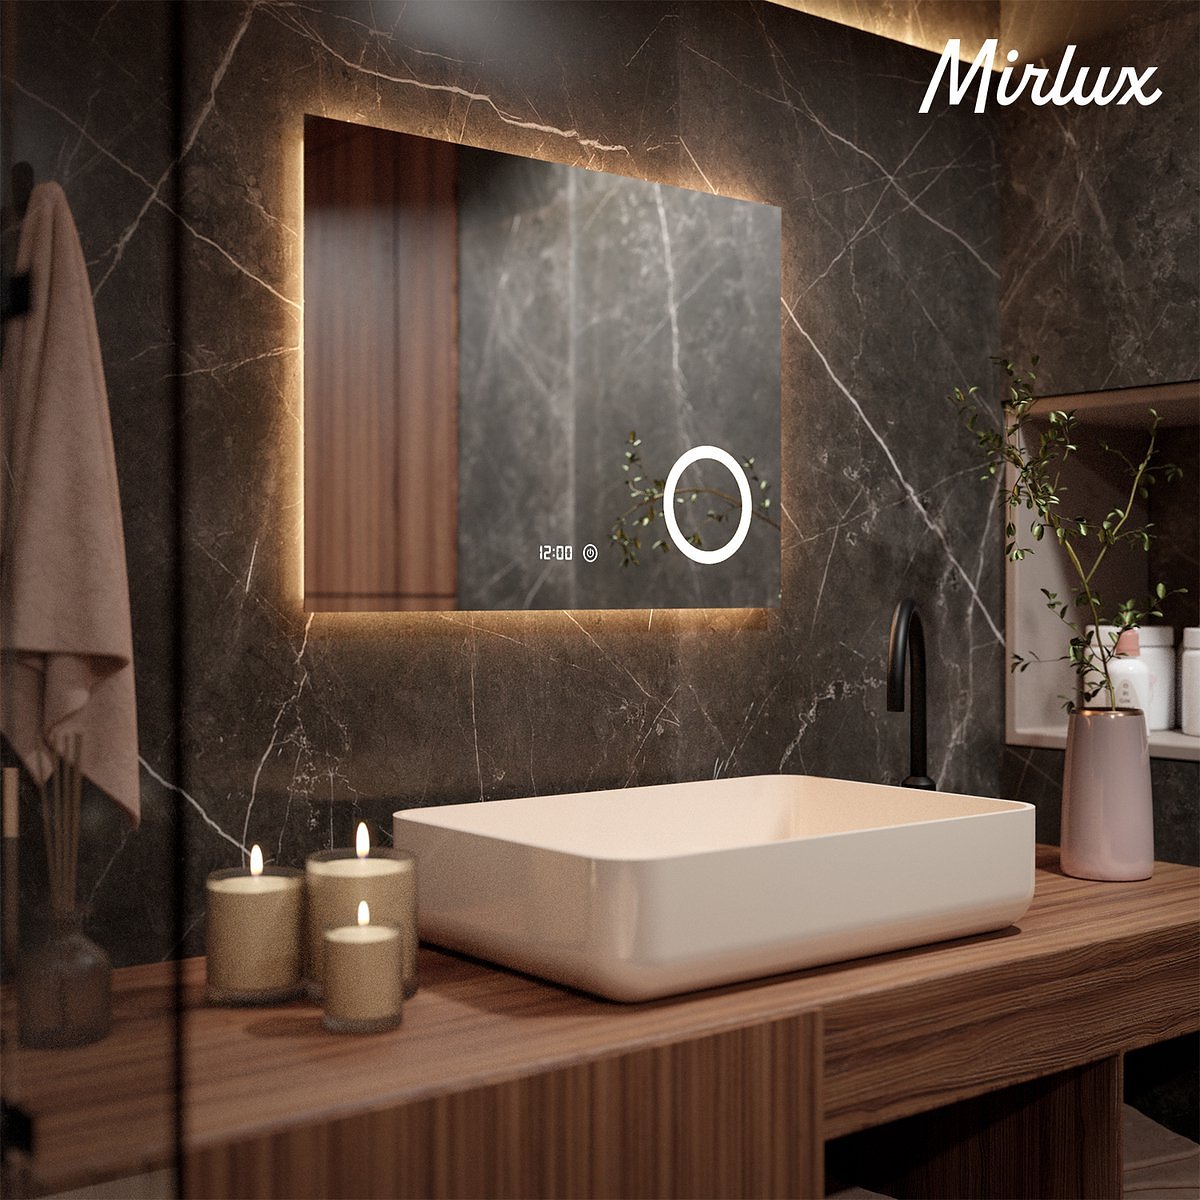 Mirlux Bathroom Mirror with LED Lighting - Round Wall Mirror - No condensation - 80X60CM